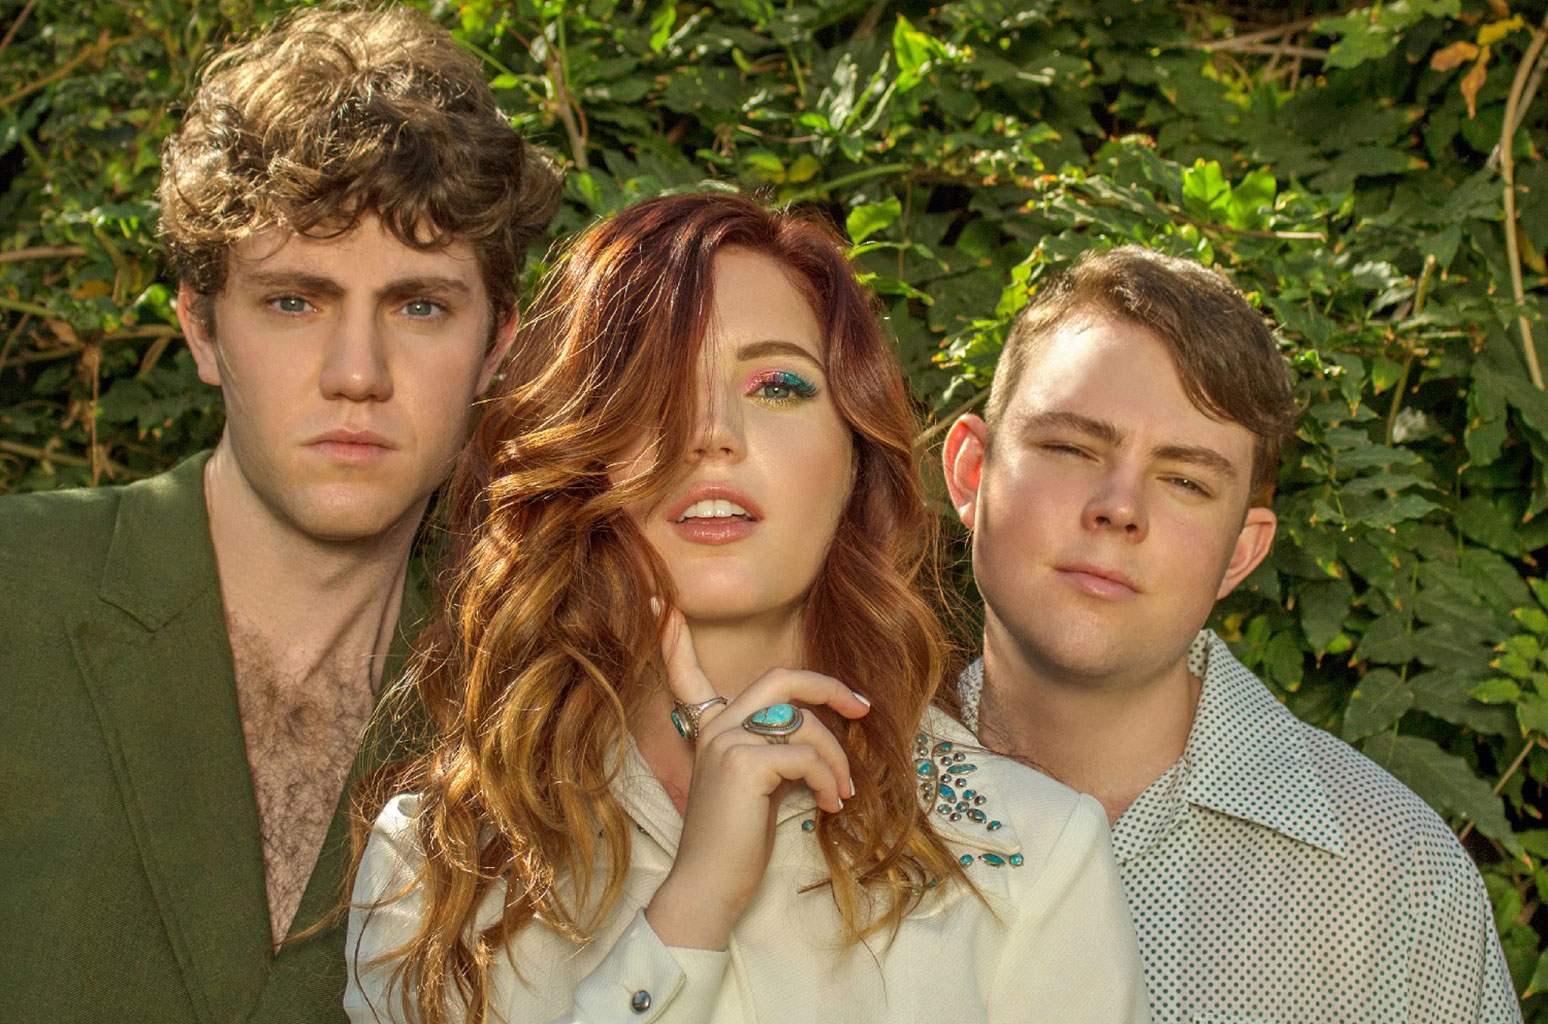 See Which Frank Ocean & R.E.M. Songs Help Echosmith Find 'Connection': Takeover Tuesday Playlist